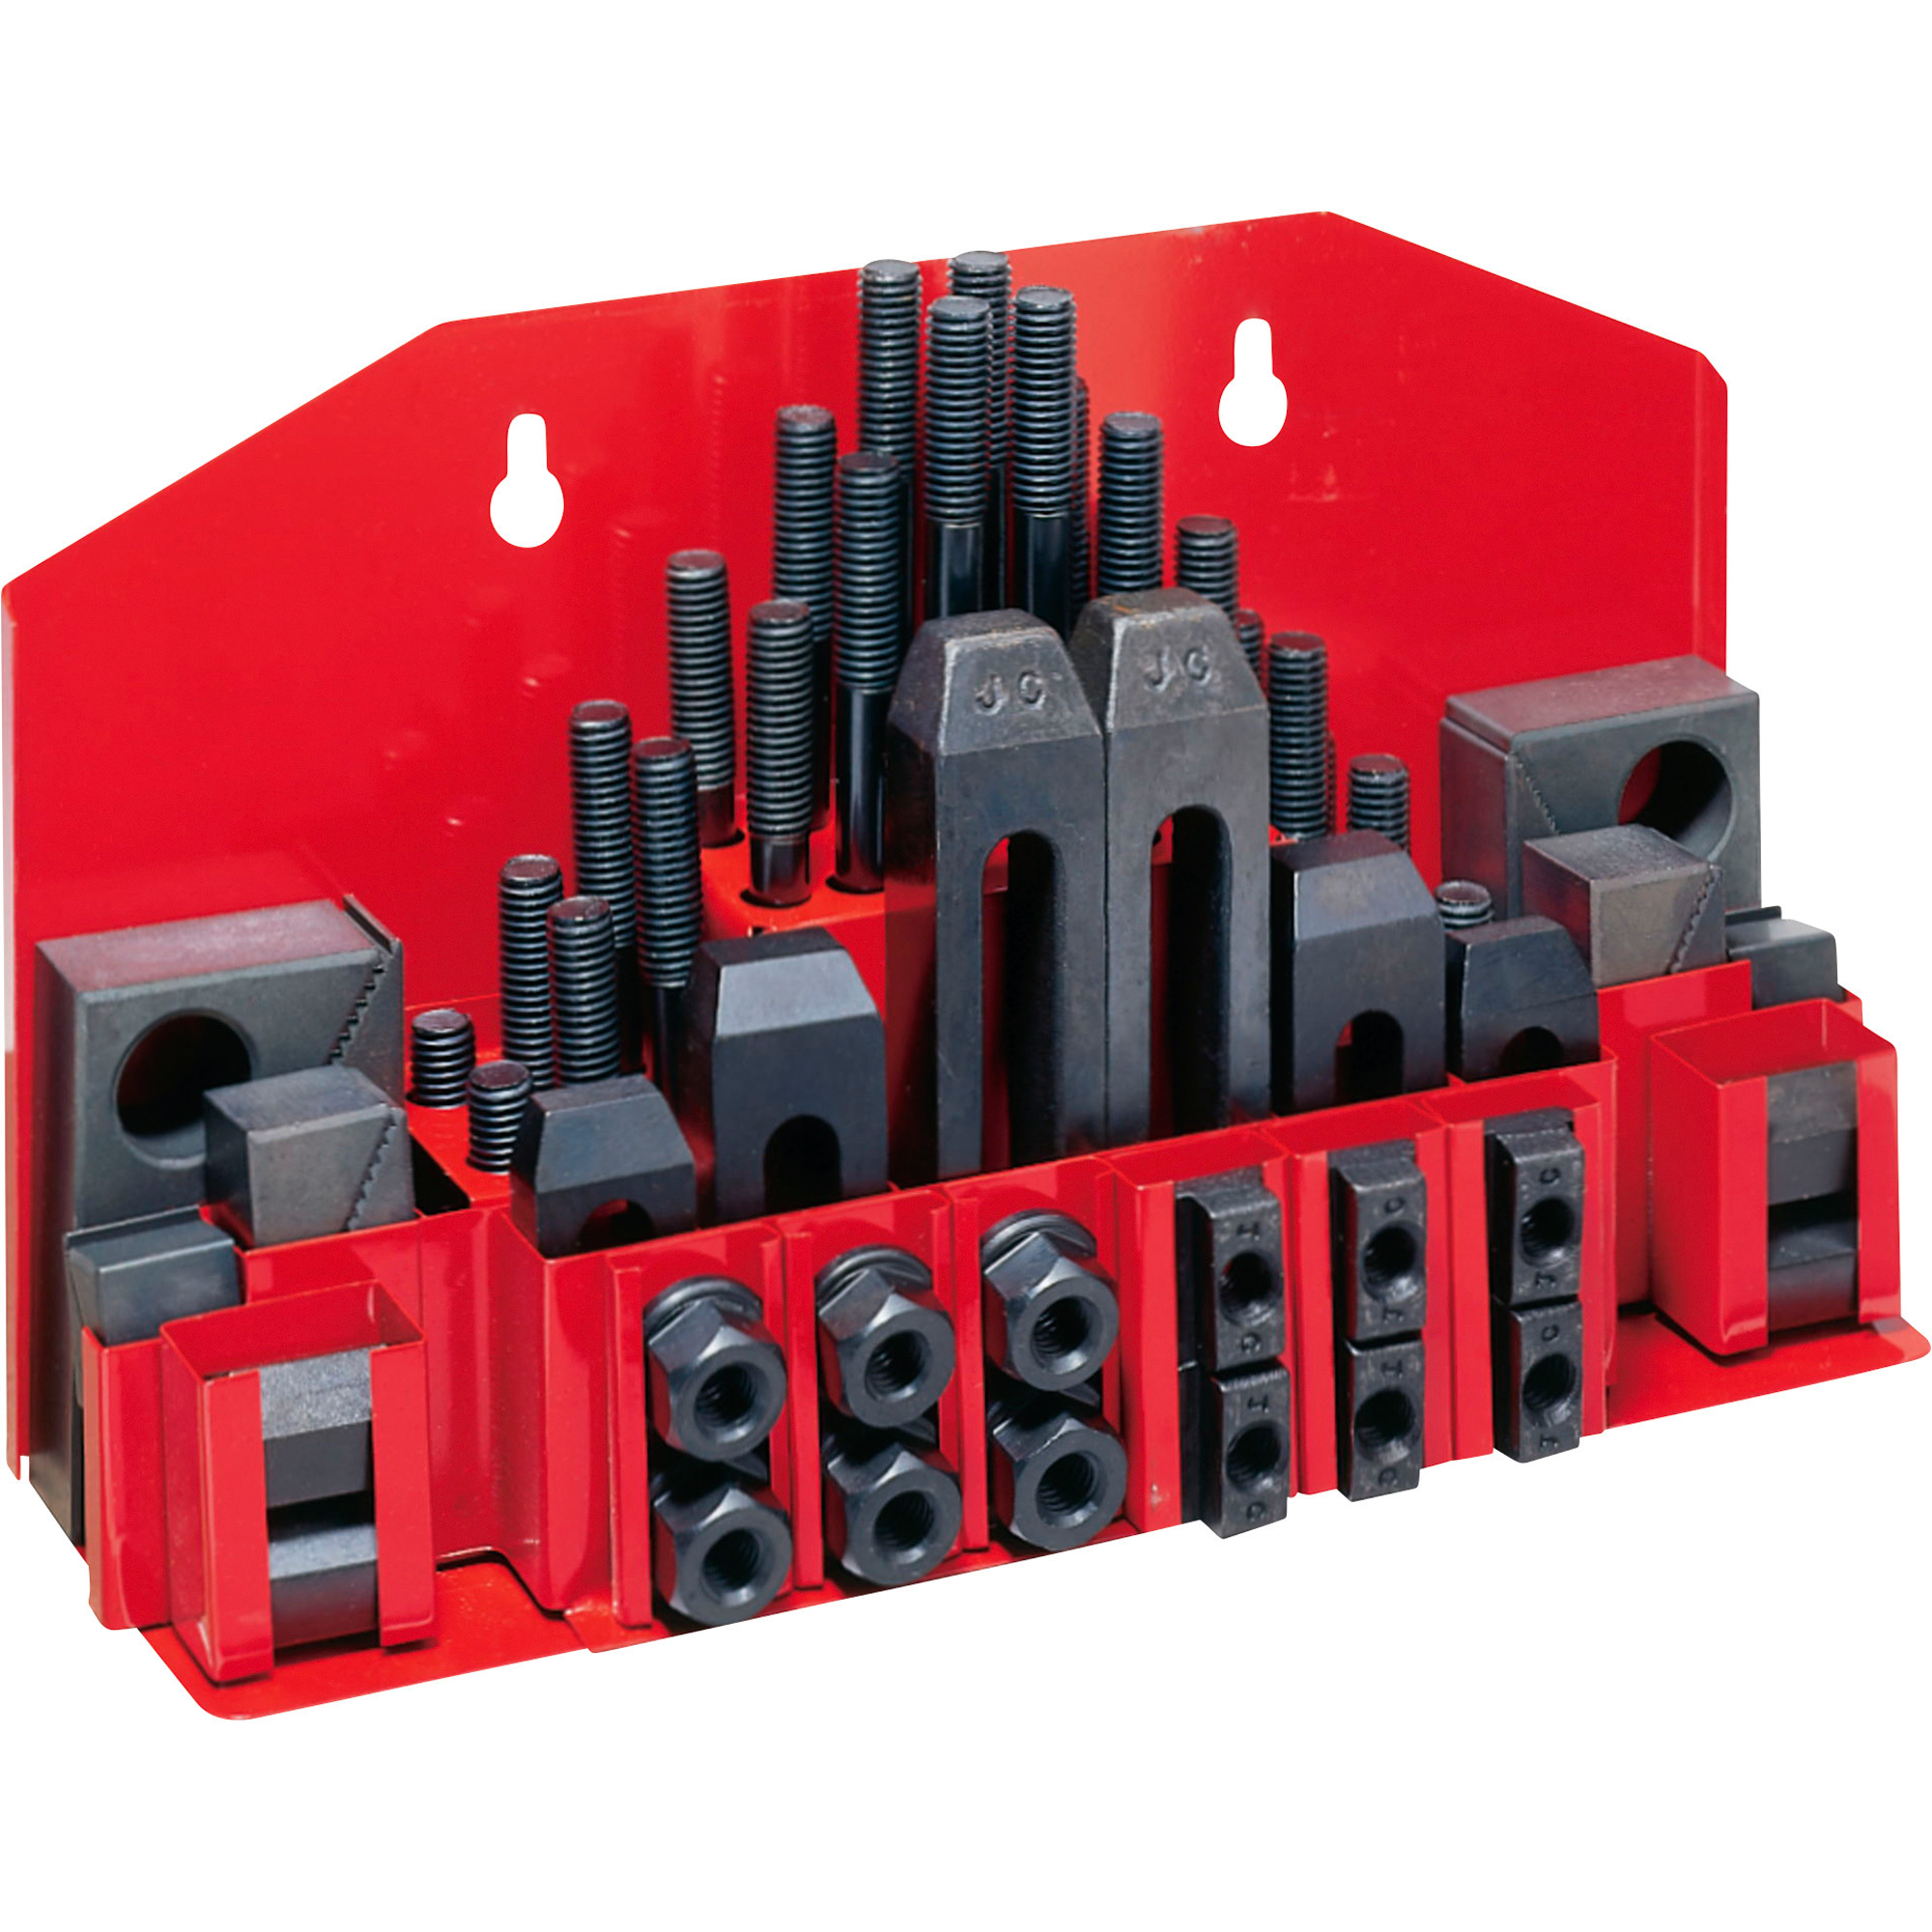 JET 58-Piece Milling Machine Clamping Kit with Tray for 9/16Inch and 5/8Inch T-Slot, Model CK-12